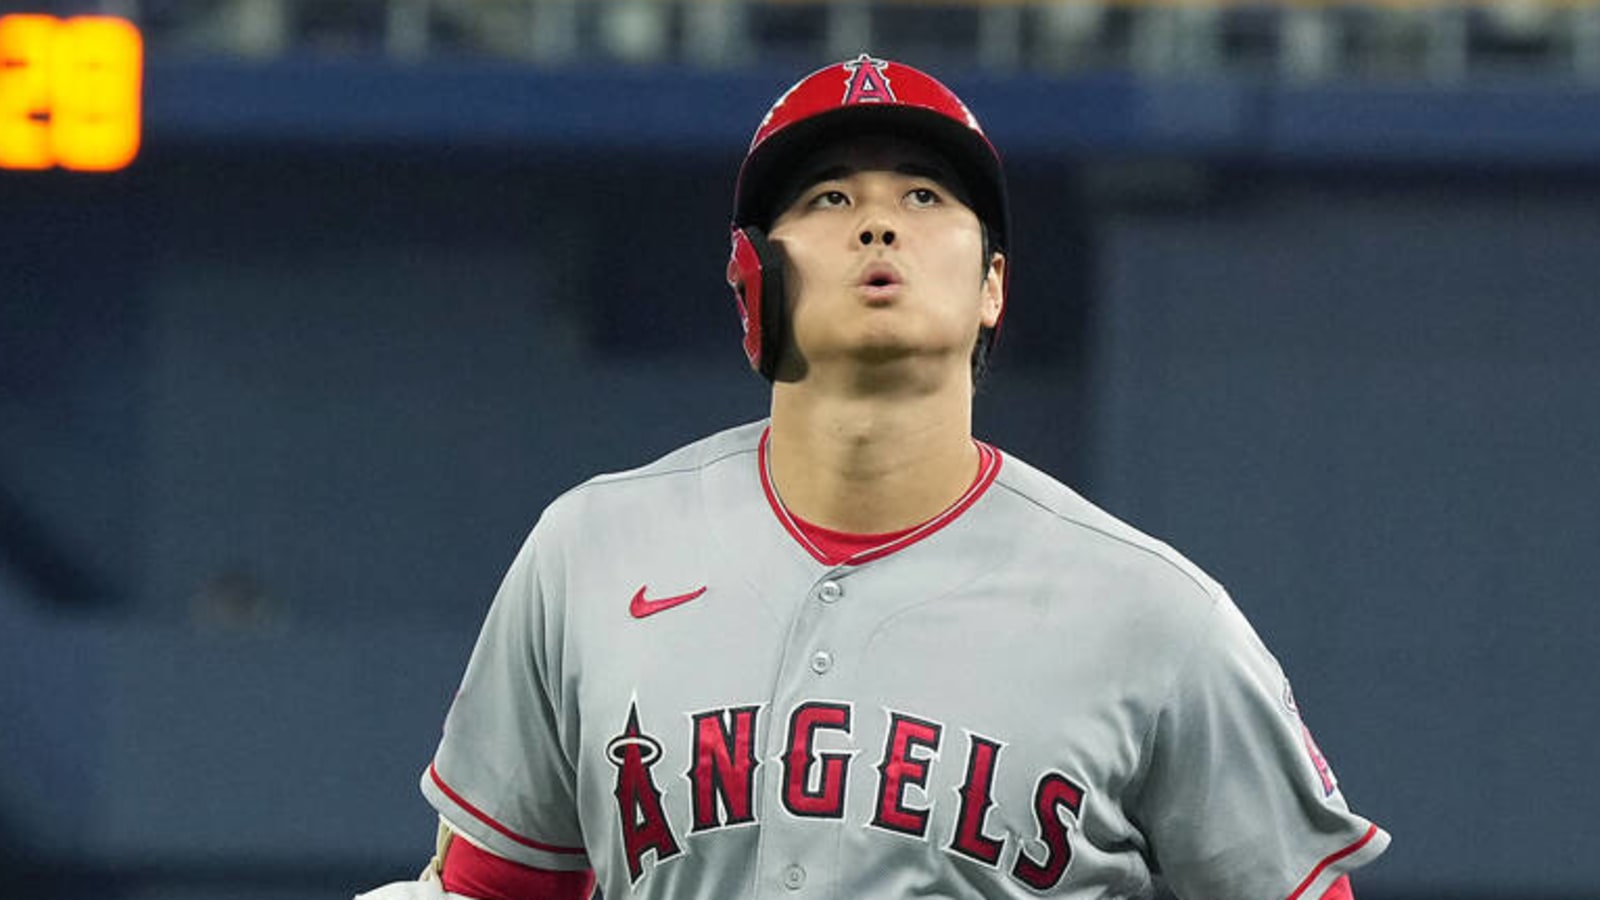 Cubs will reportedly pursue Ohtani in free agency